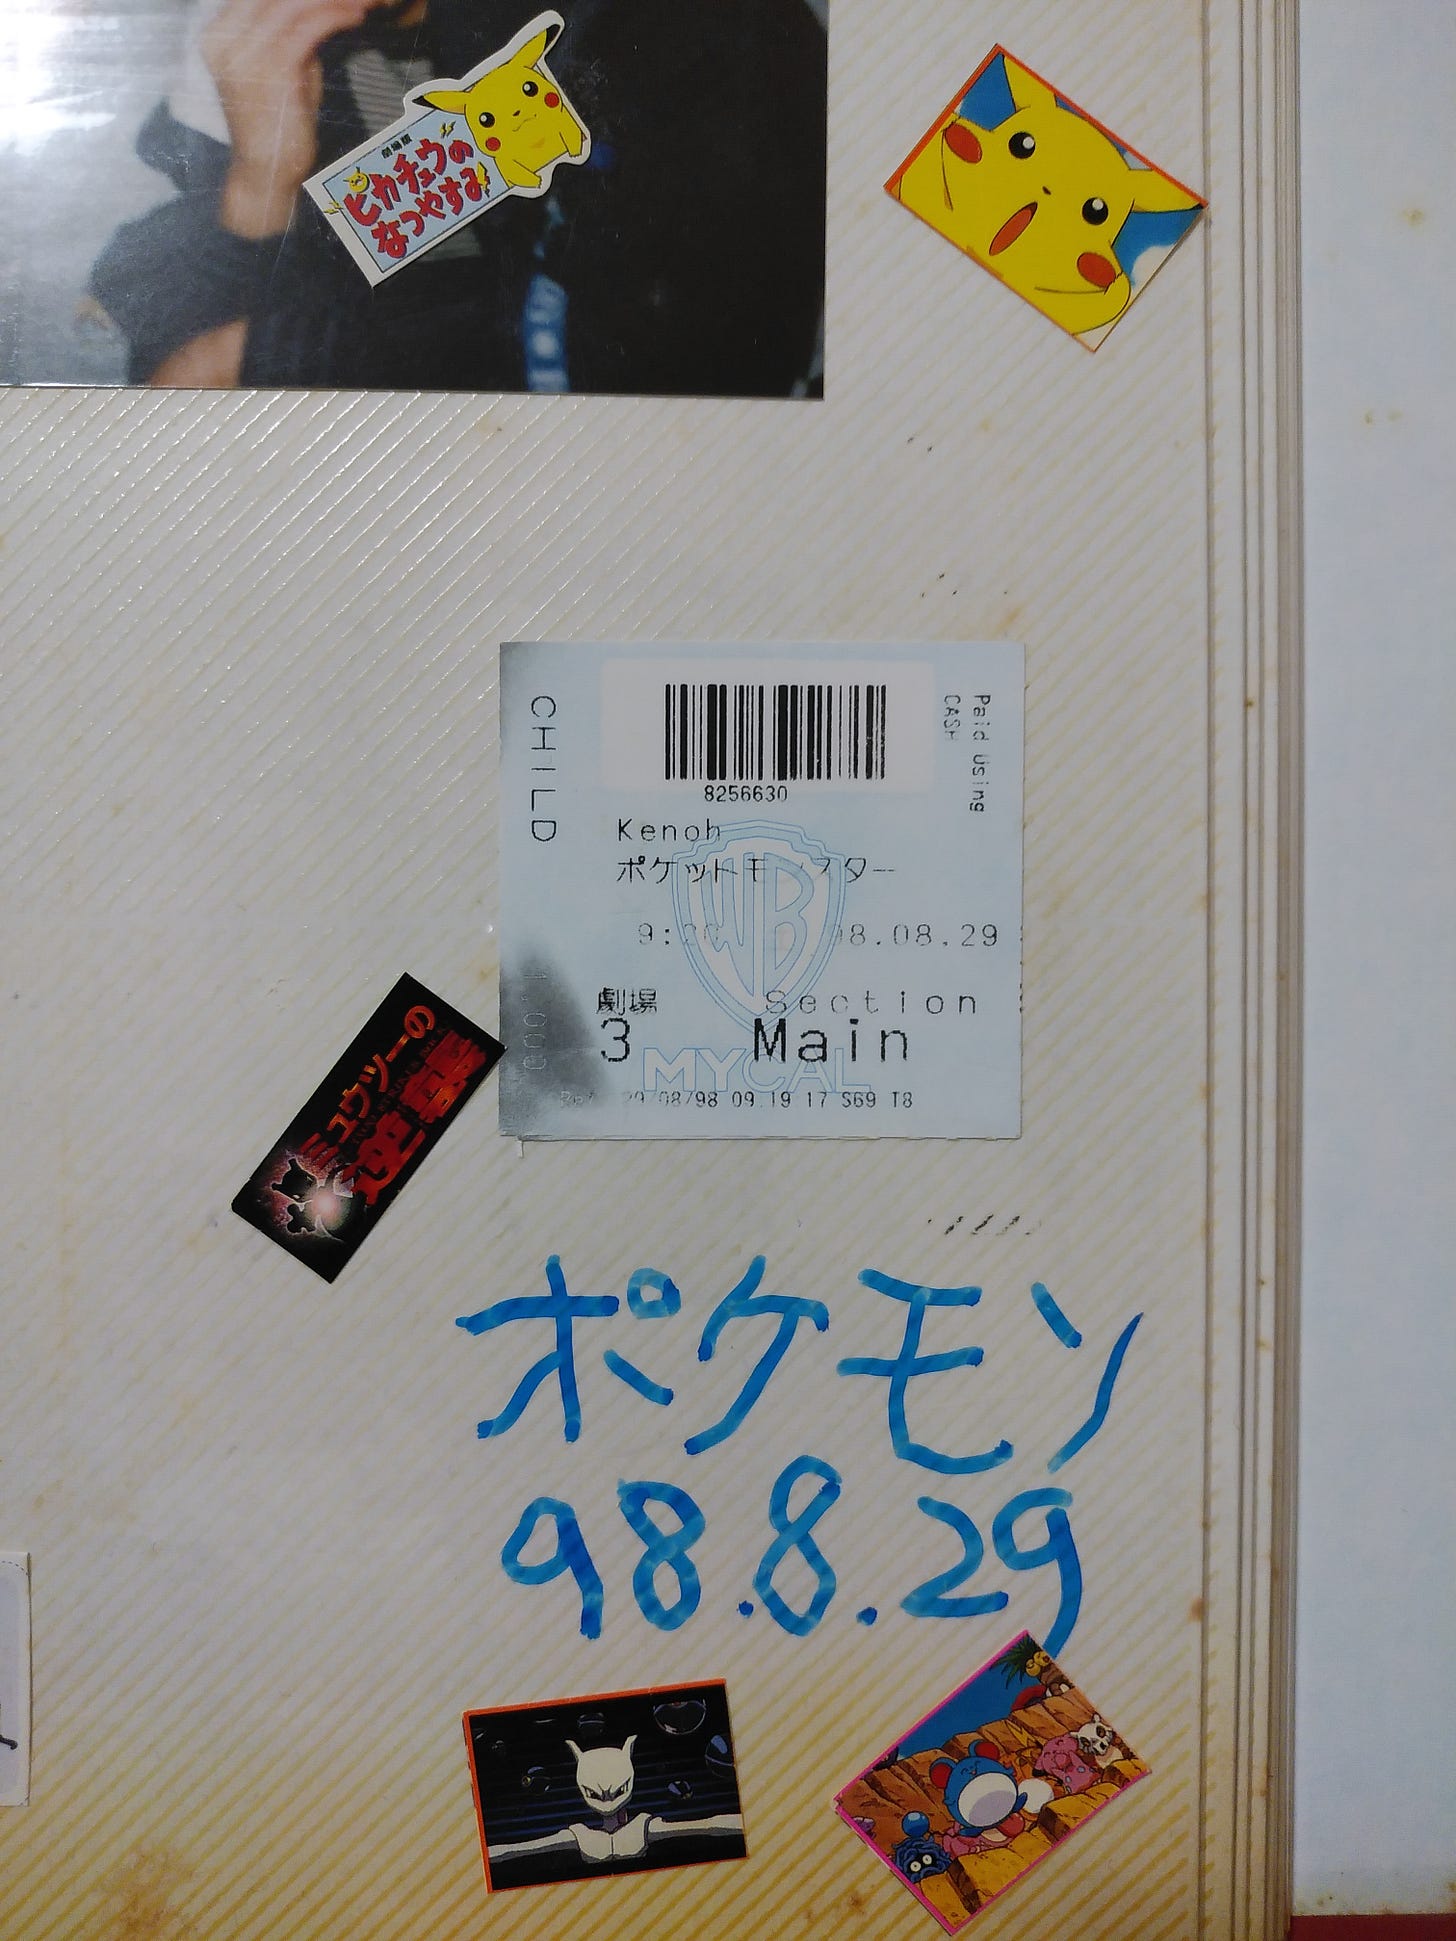 A movie ticket stub for Mewtwo Strikes Back, dated 29th August, 1998